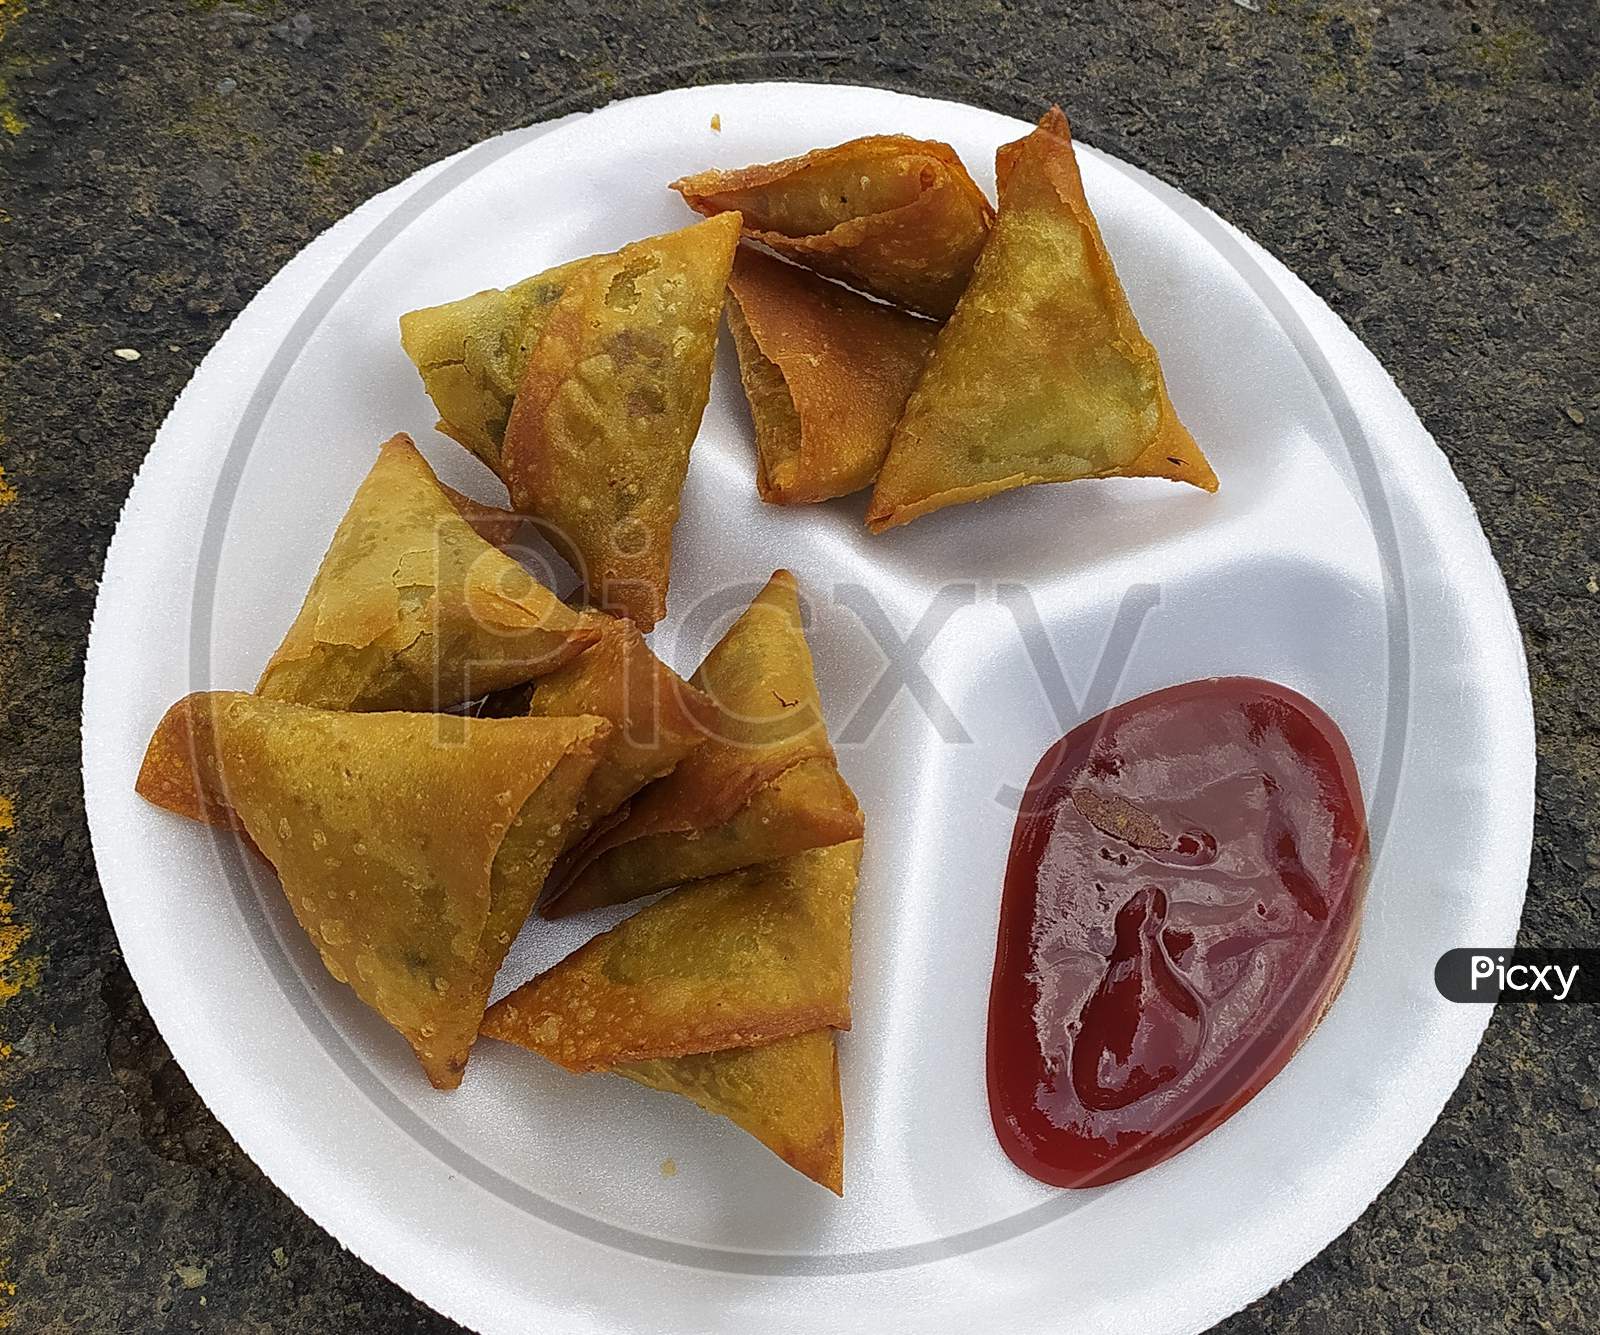 Fried samosa in disposable dish with tomato ketchup